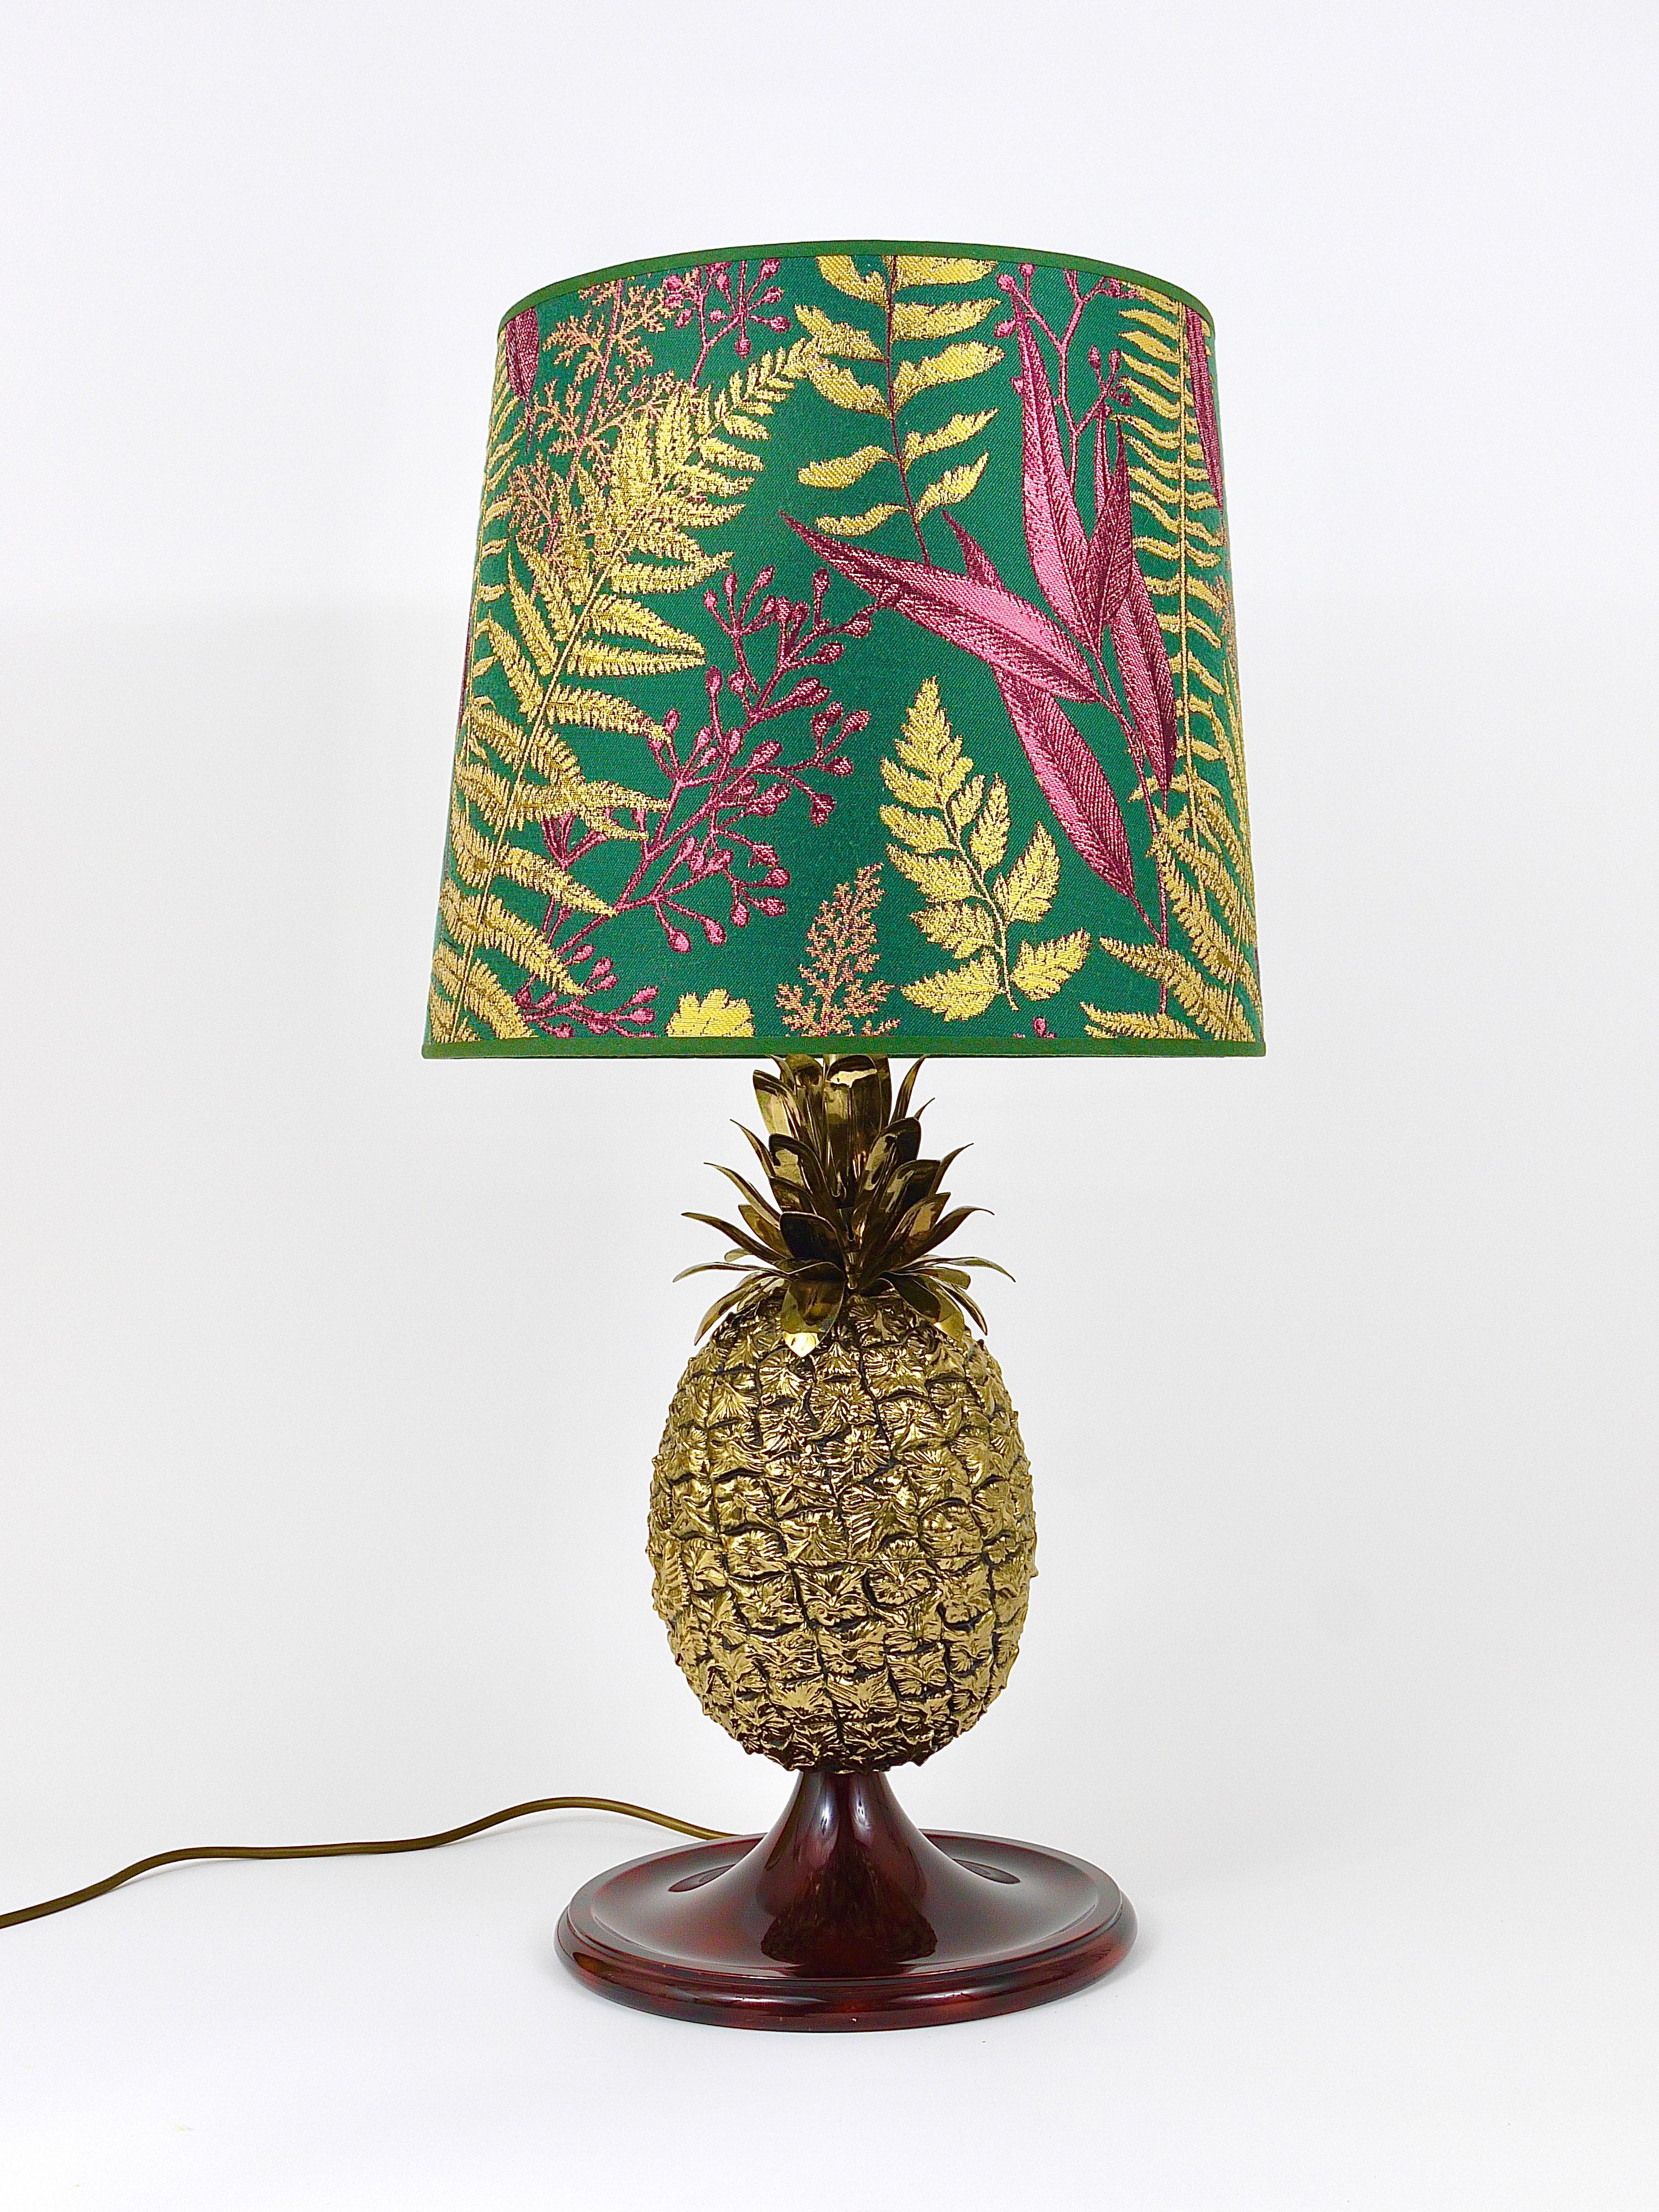 Mauro Manetti Hollywood Regency Pineapple Brass Table Lamp, Italy, 1970s For Sale 10